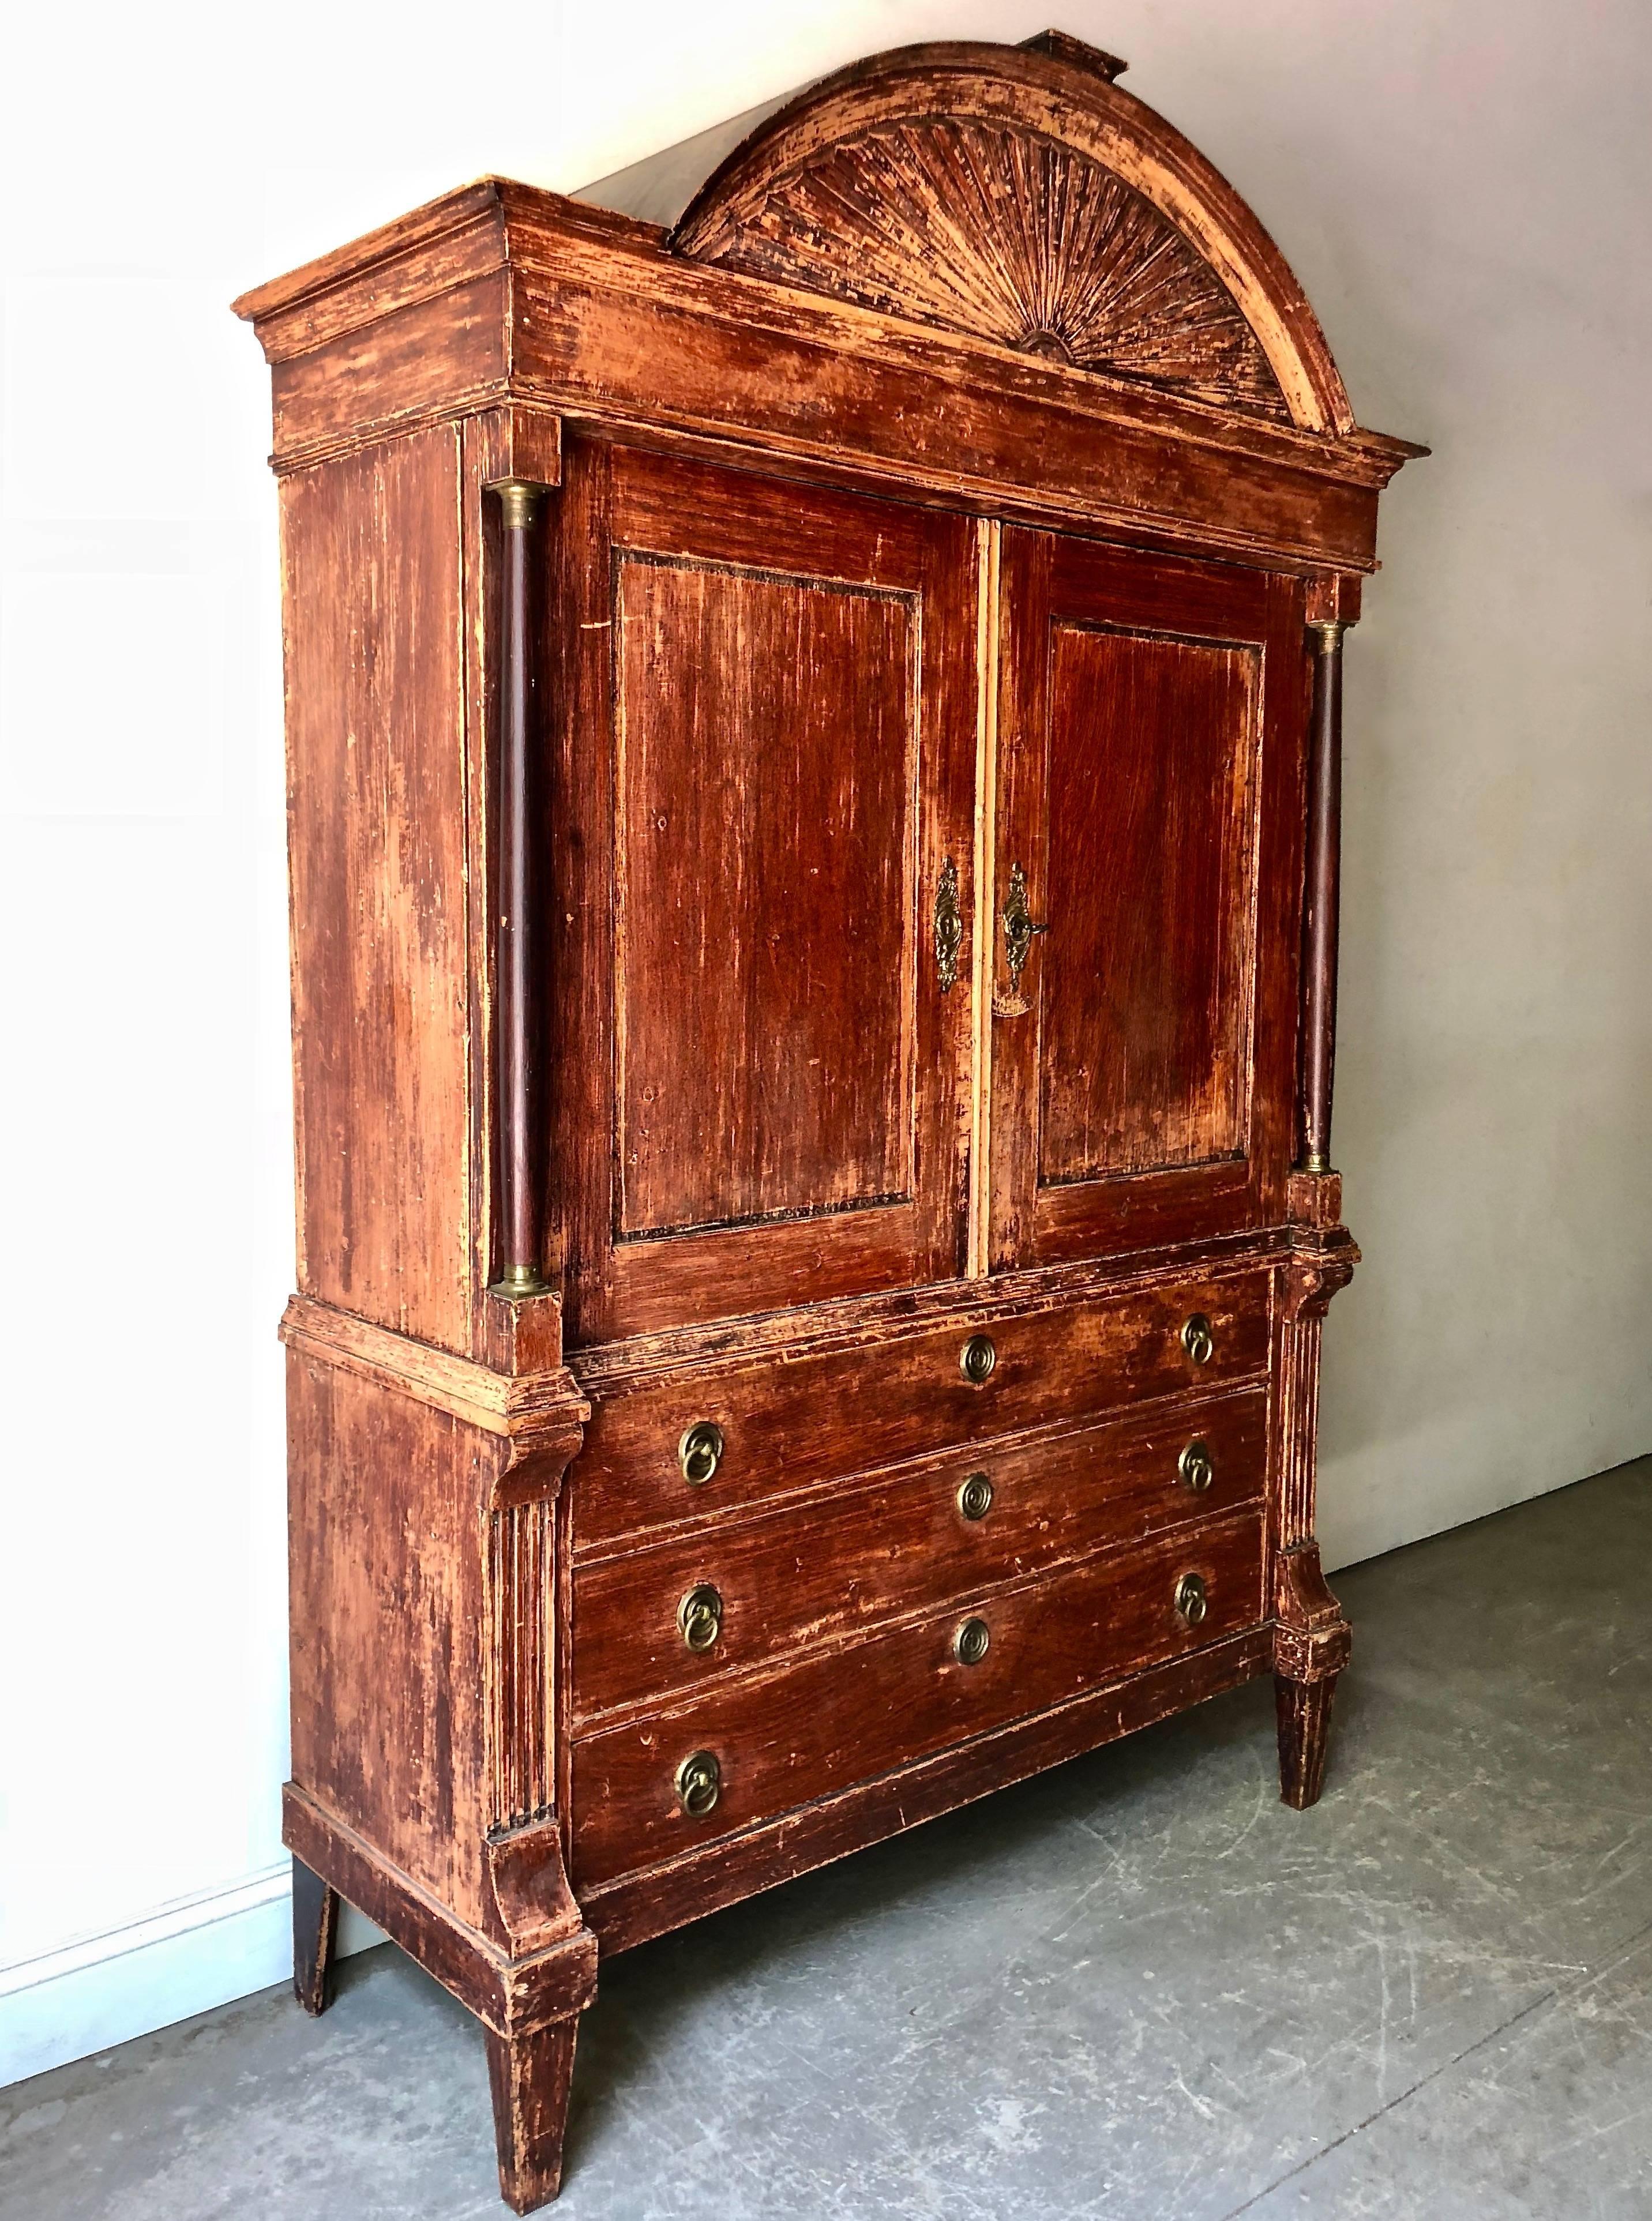 Handsome and usual 19th century Dutch Cabinet with richly carved bonnet in original patina and lot of storage.
Holland, circa 1850-1860.